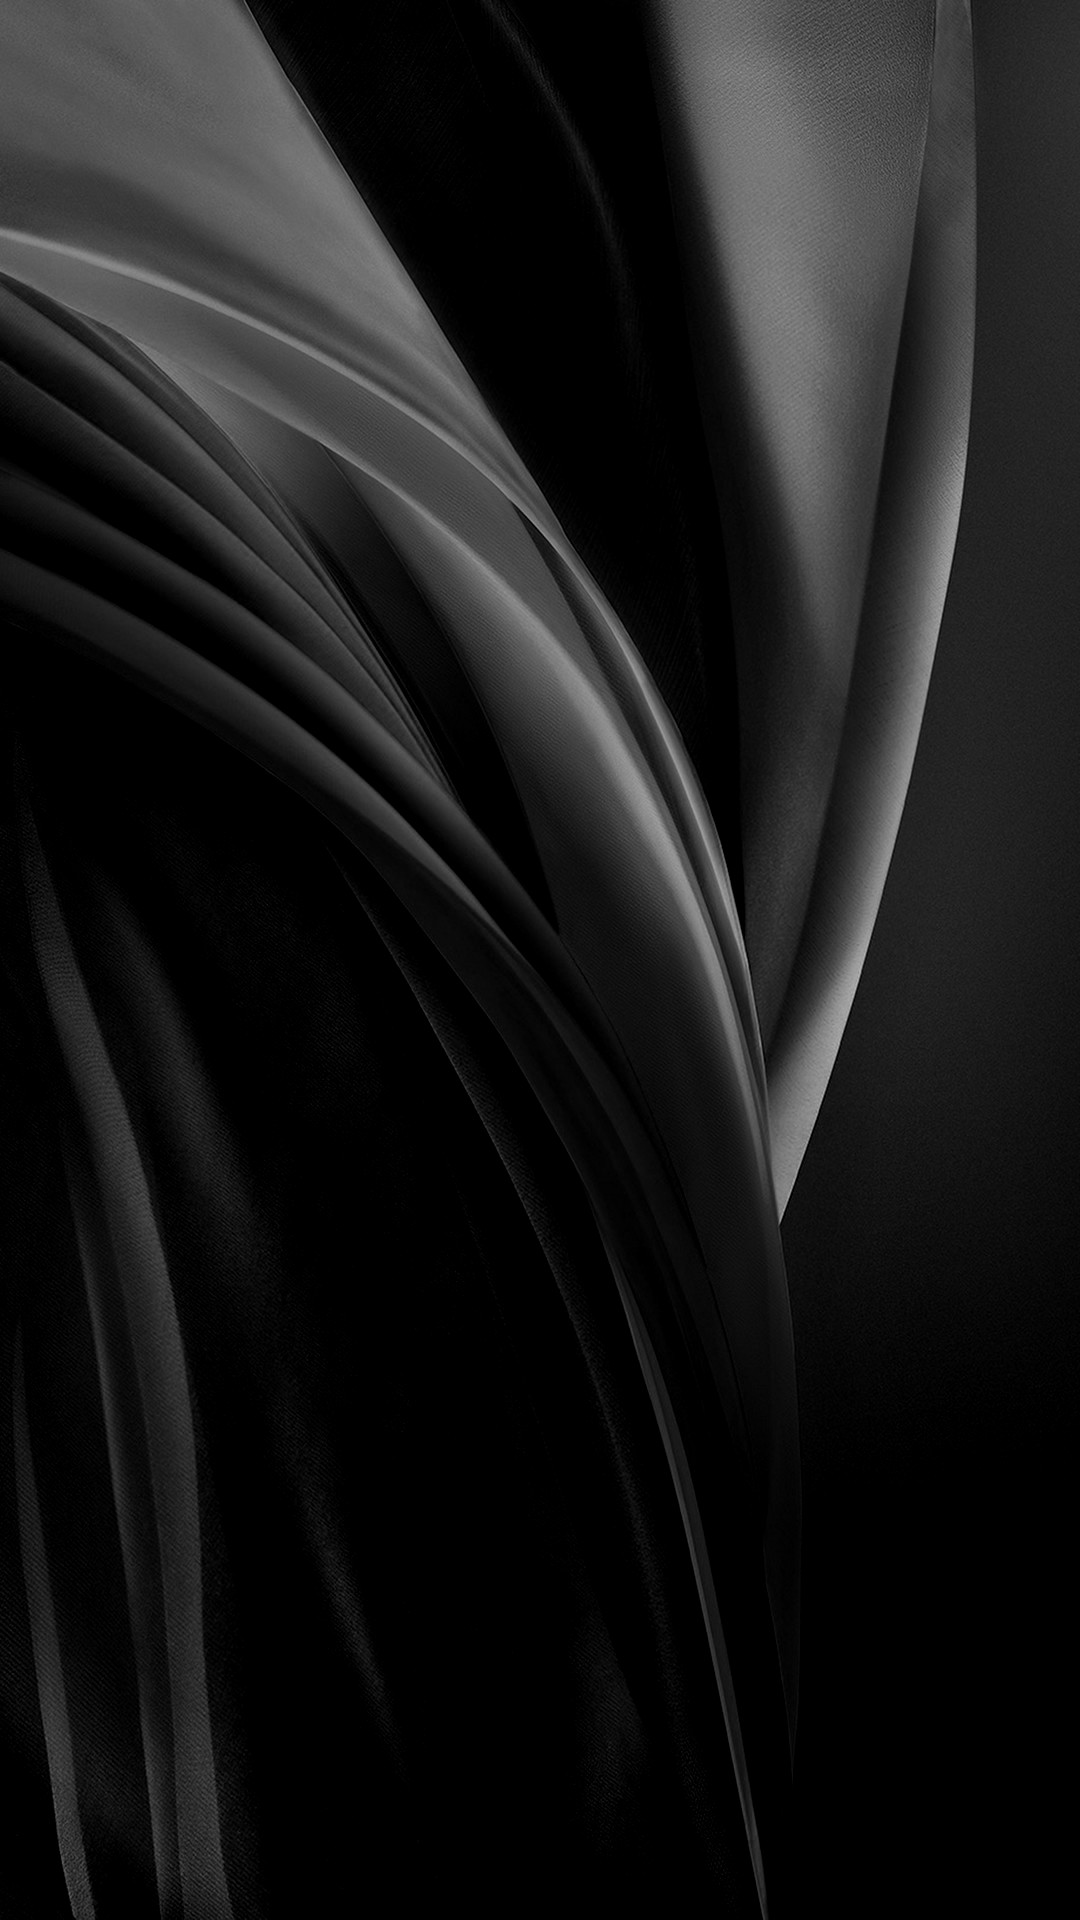 Black Silk iPhone X Wallpaper HD with high-resolution 1080x1920 pixel. Download all Mobile Wallpapers and Use them as wallpapers for your iPhone, Tablet, iPad, Android and other mobile devices